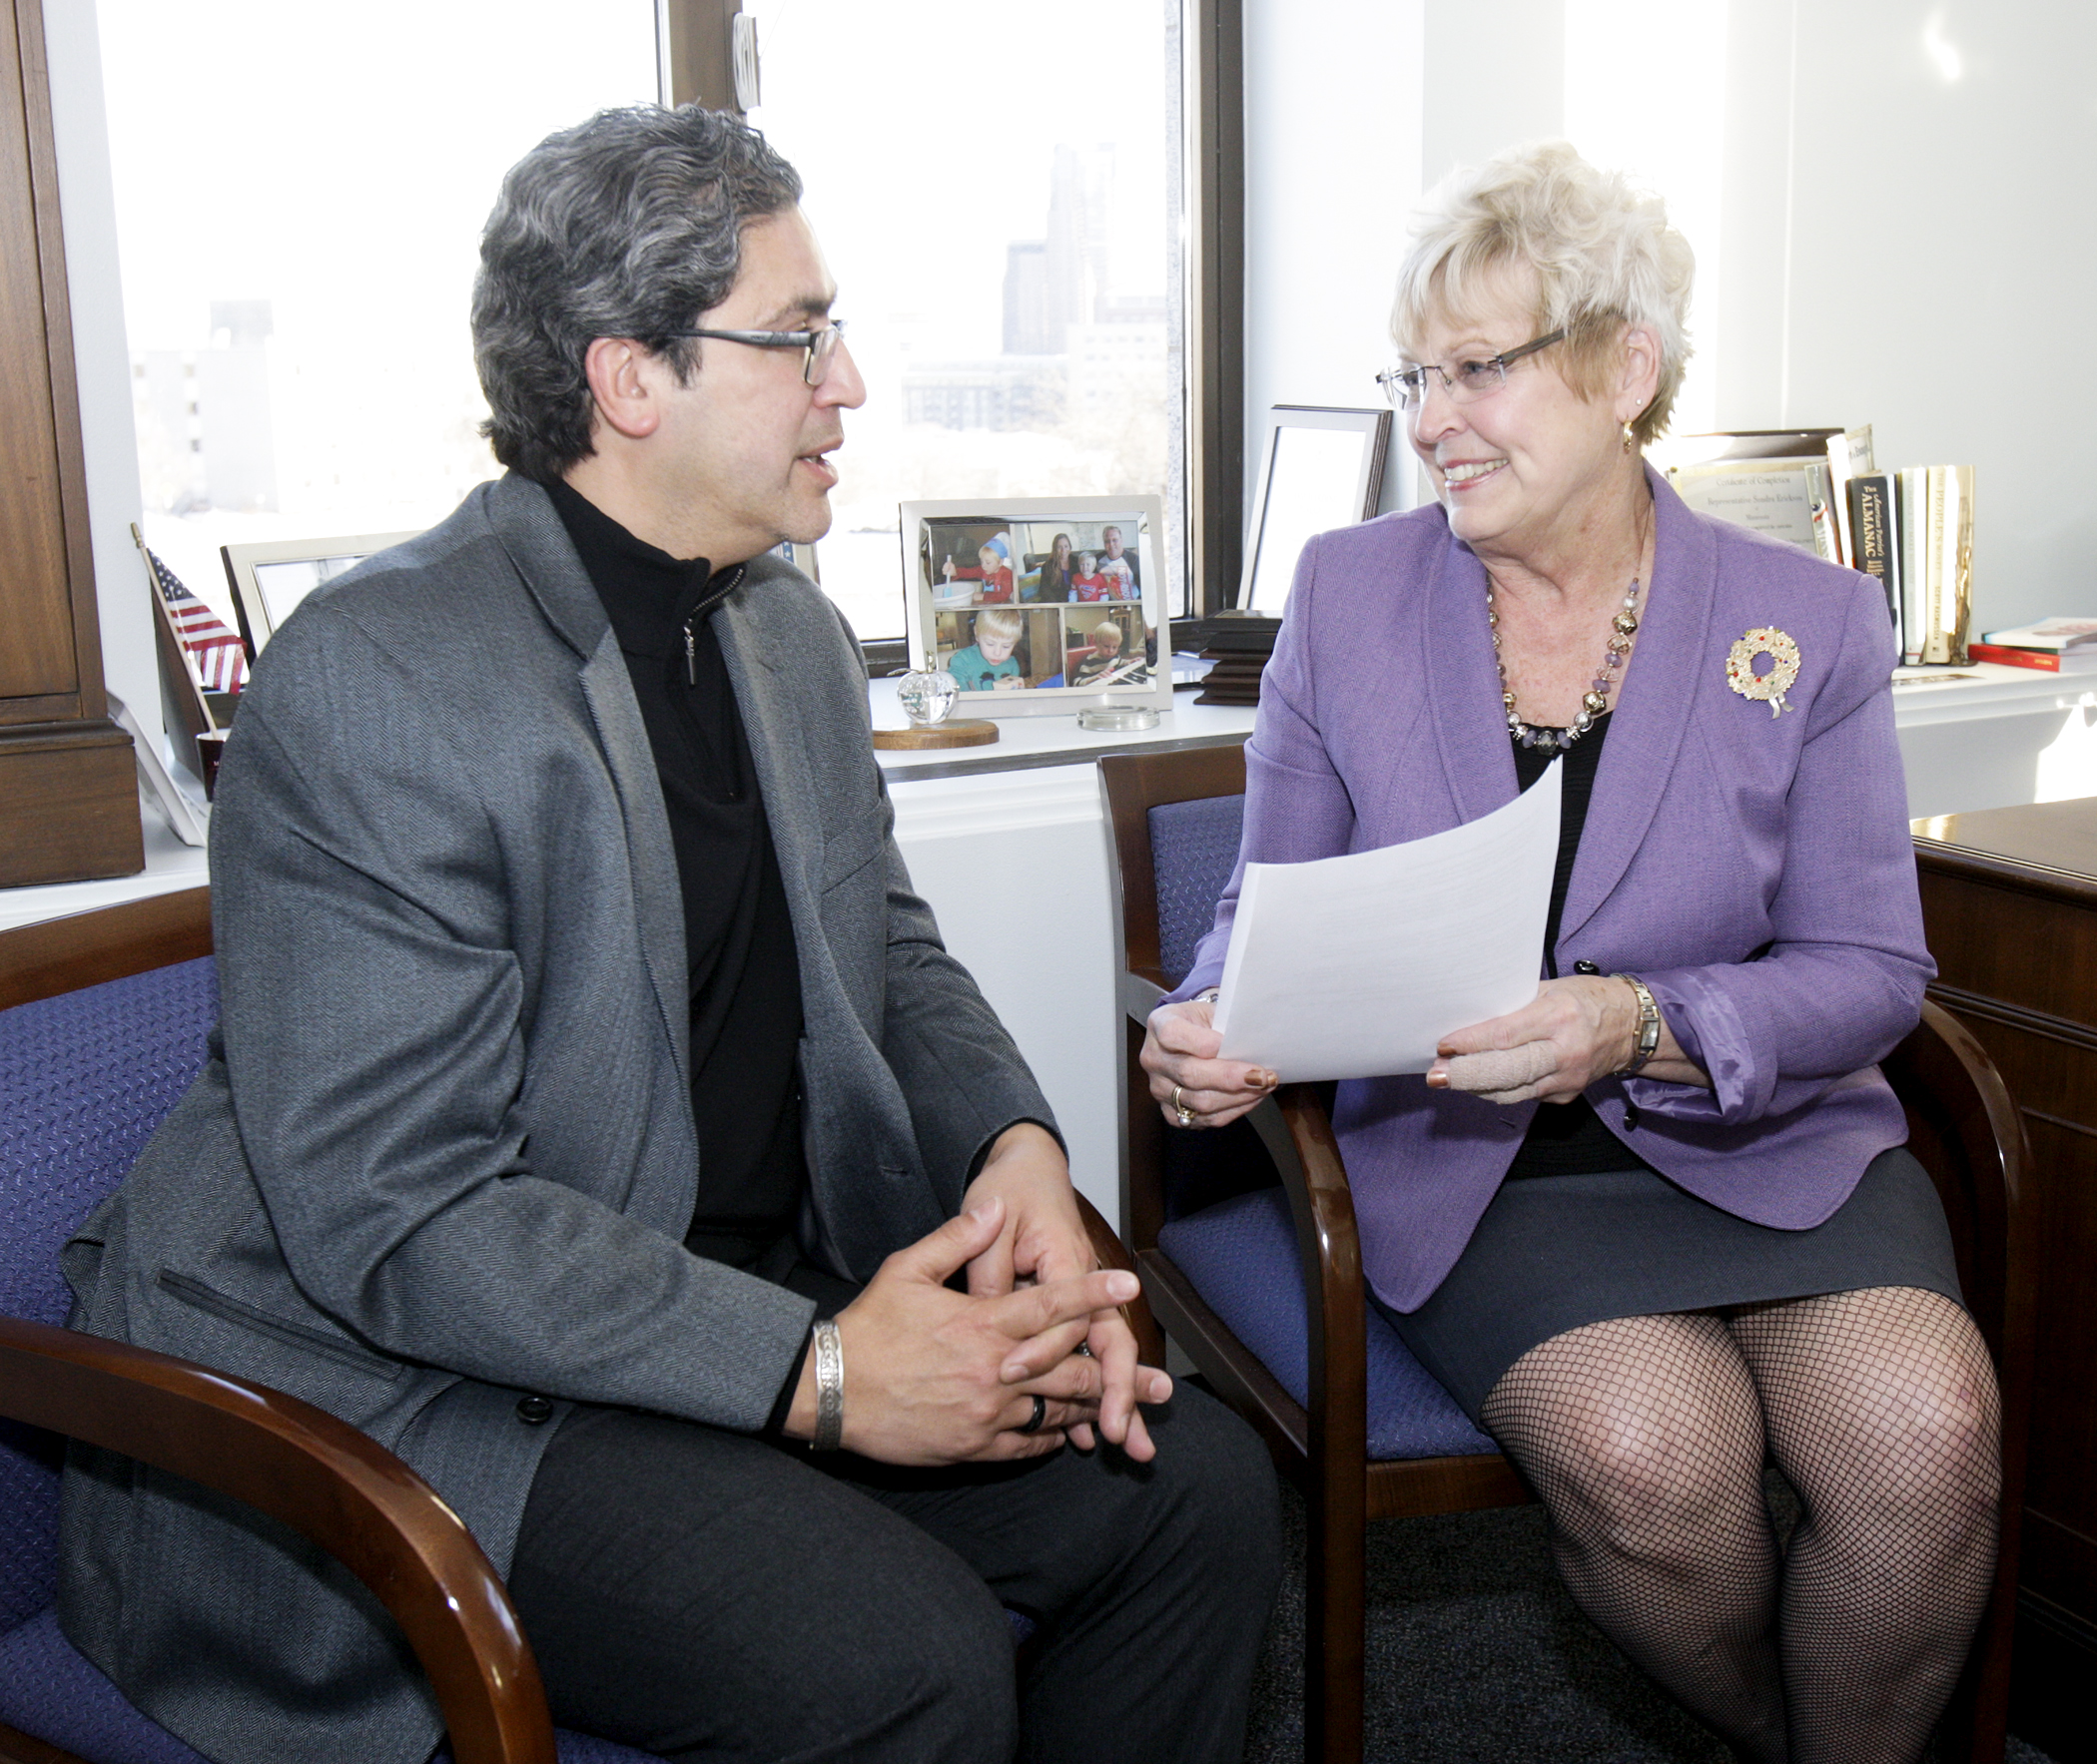 Rep. Sondra Erickson, chair of the House Education Innovation Policy Committee, talks with Rep. Carlos Mariani, who is a past education policy committee chair. Photo by Paul Battaglia